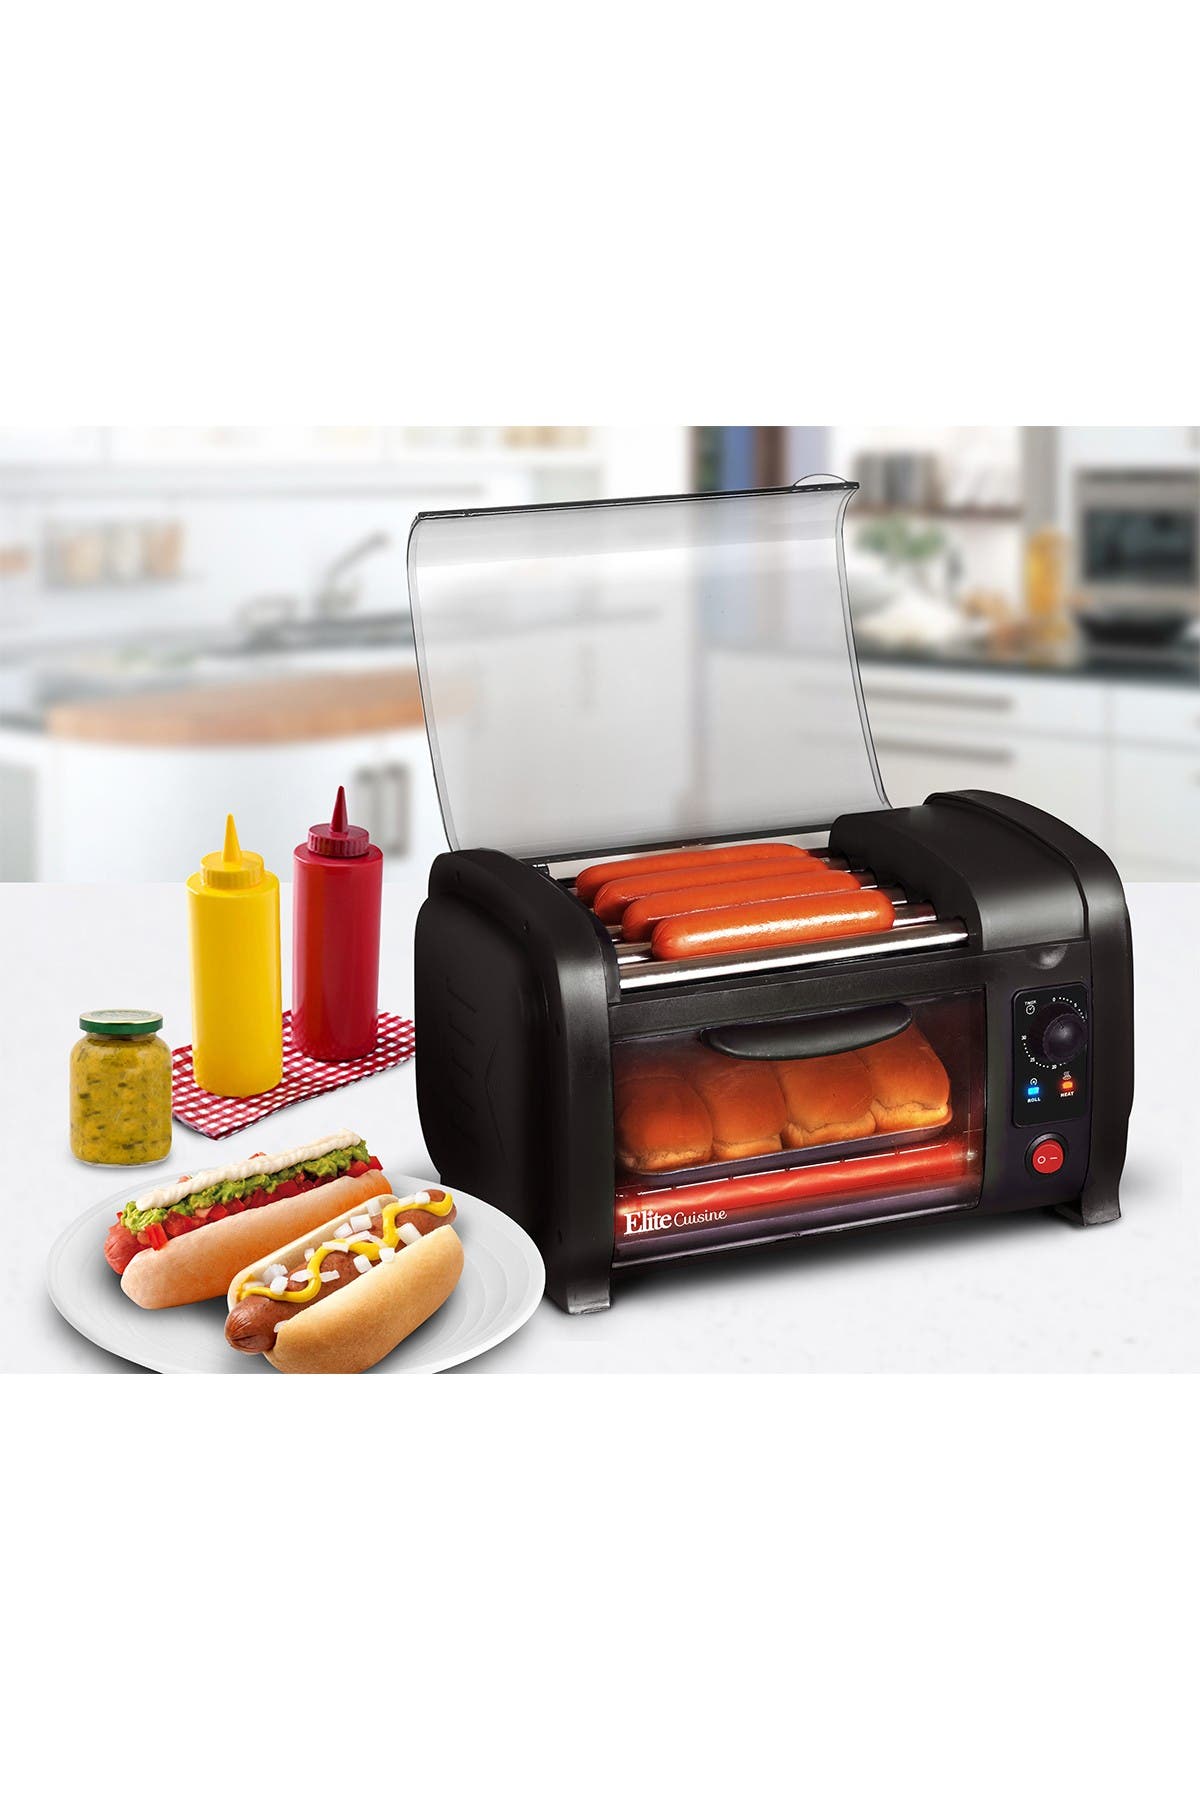 Elite Cuisine Hot Dog Toaster Oven with Stainless Steel Grill Rollers Bun Warmer